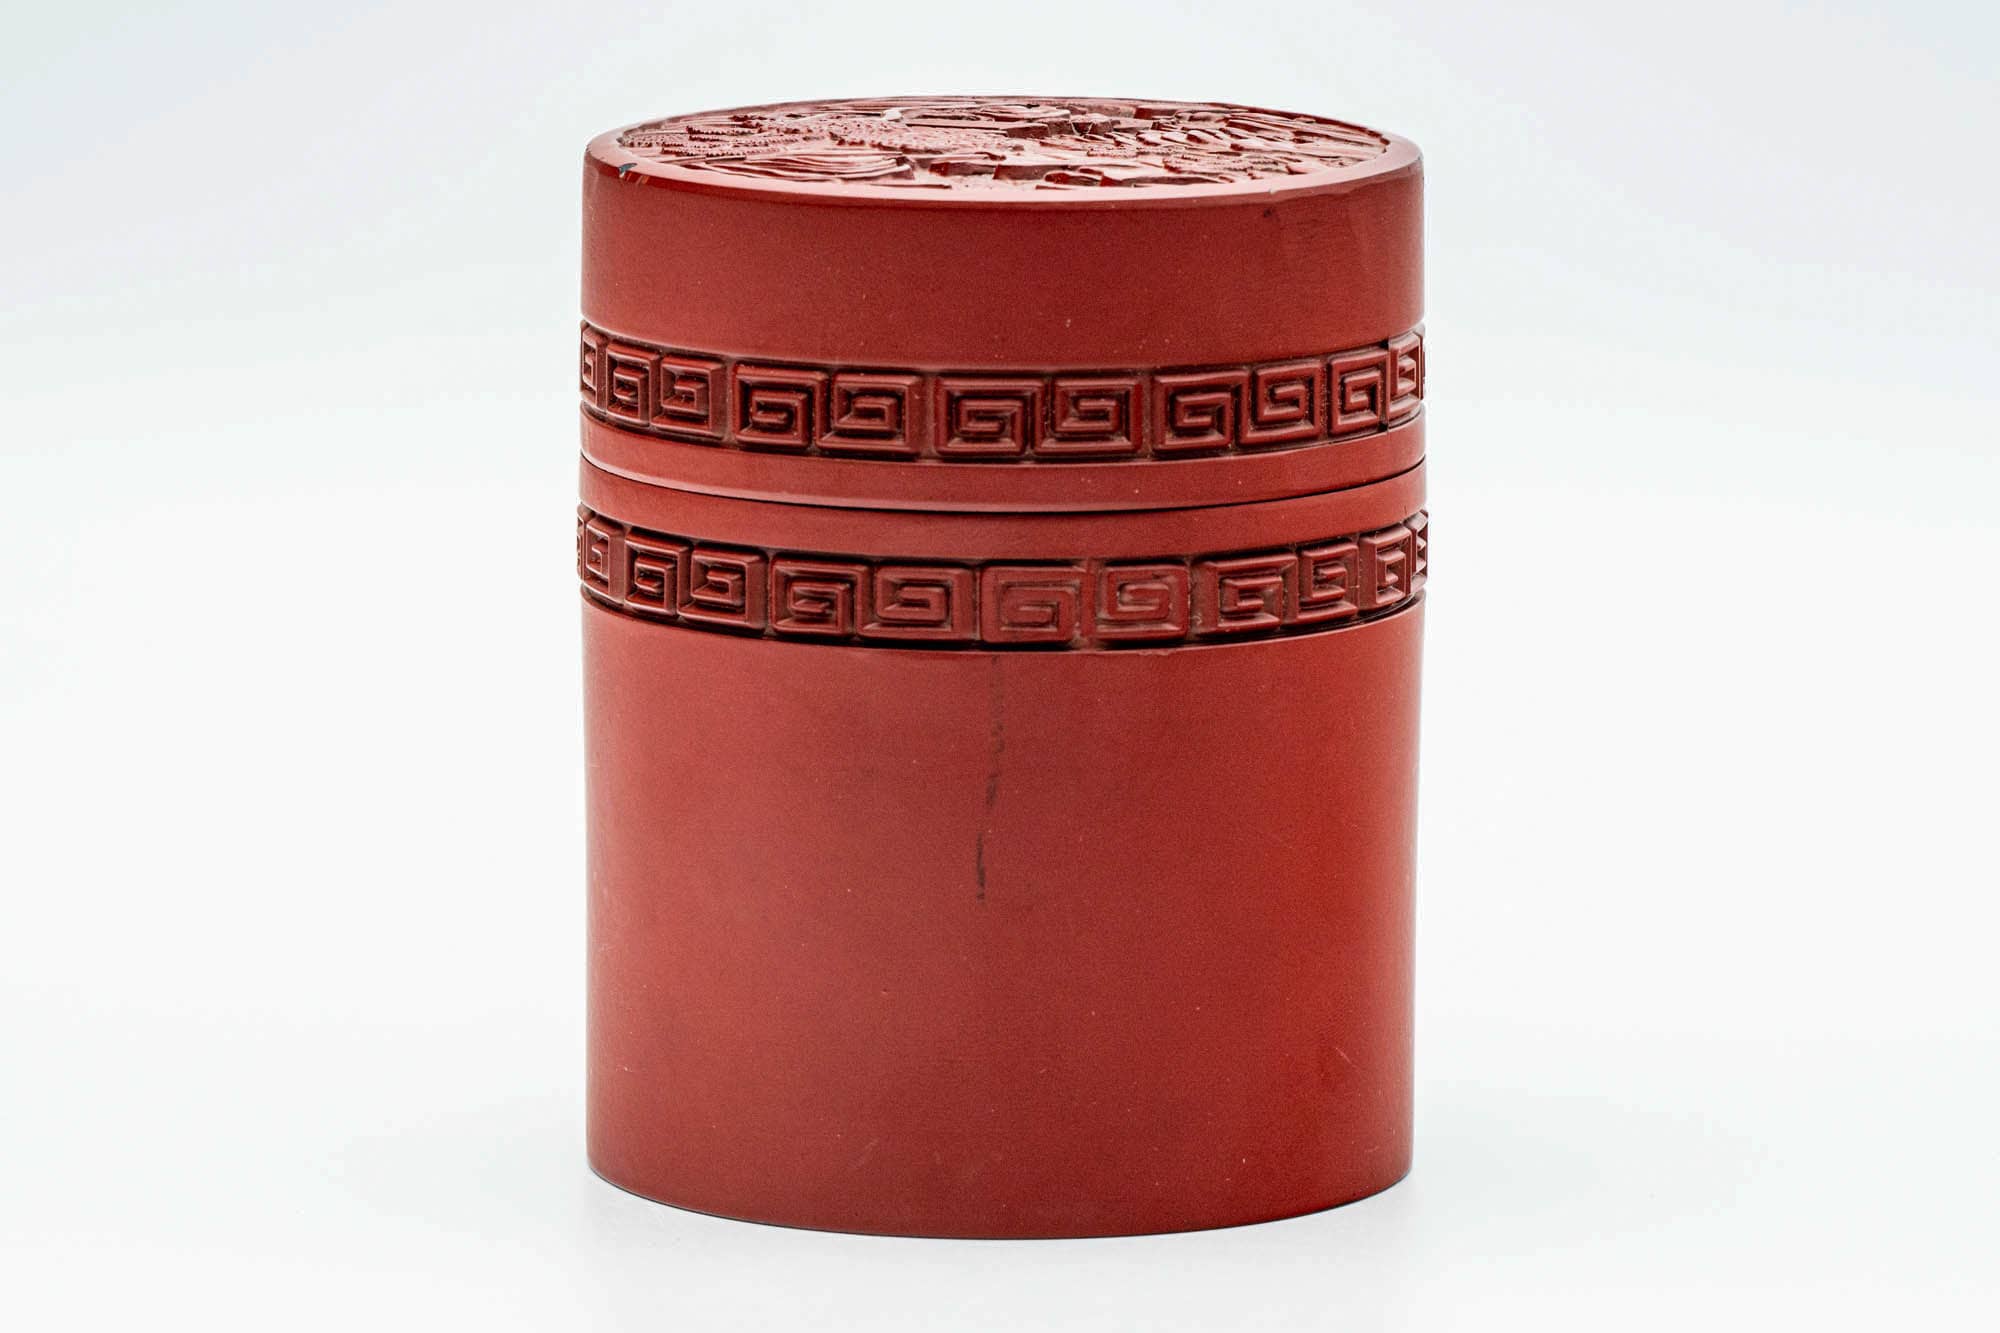 Japanese Chazutsu - Village Landscape Engraved Red Lacquer Tea Canister - 300ml